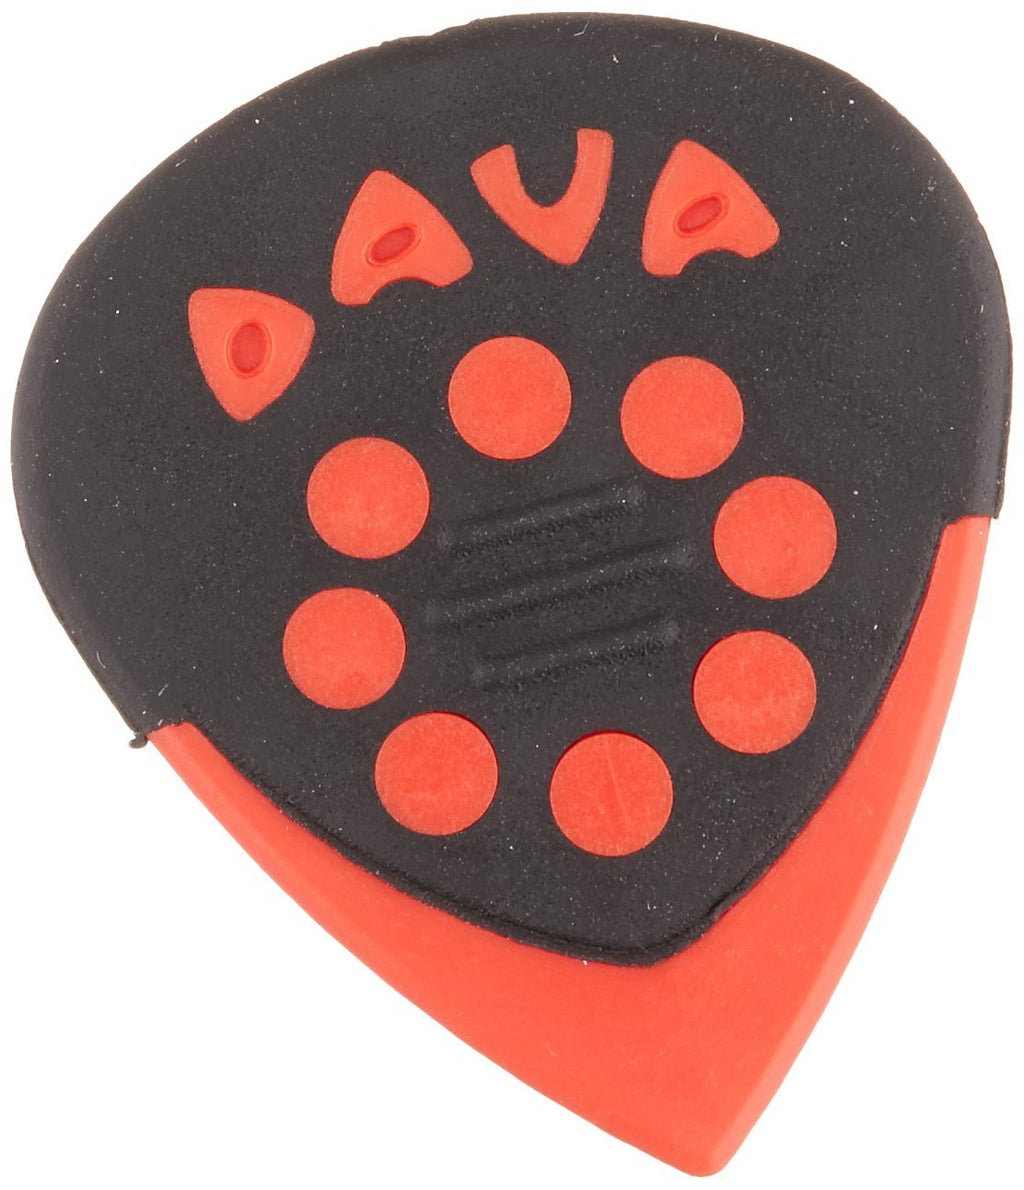 Dava Jazz Grips Pick 6-Pack 9024 Red MultiColored